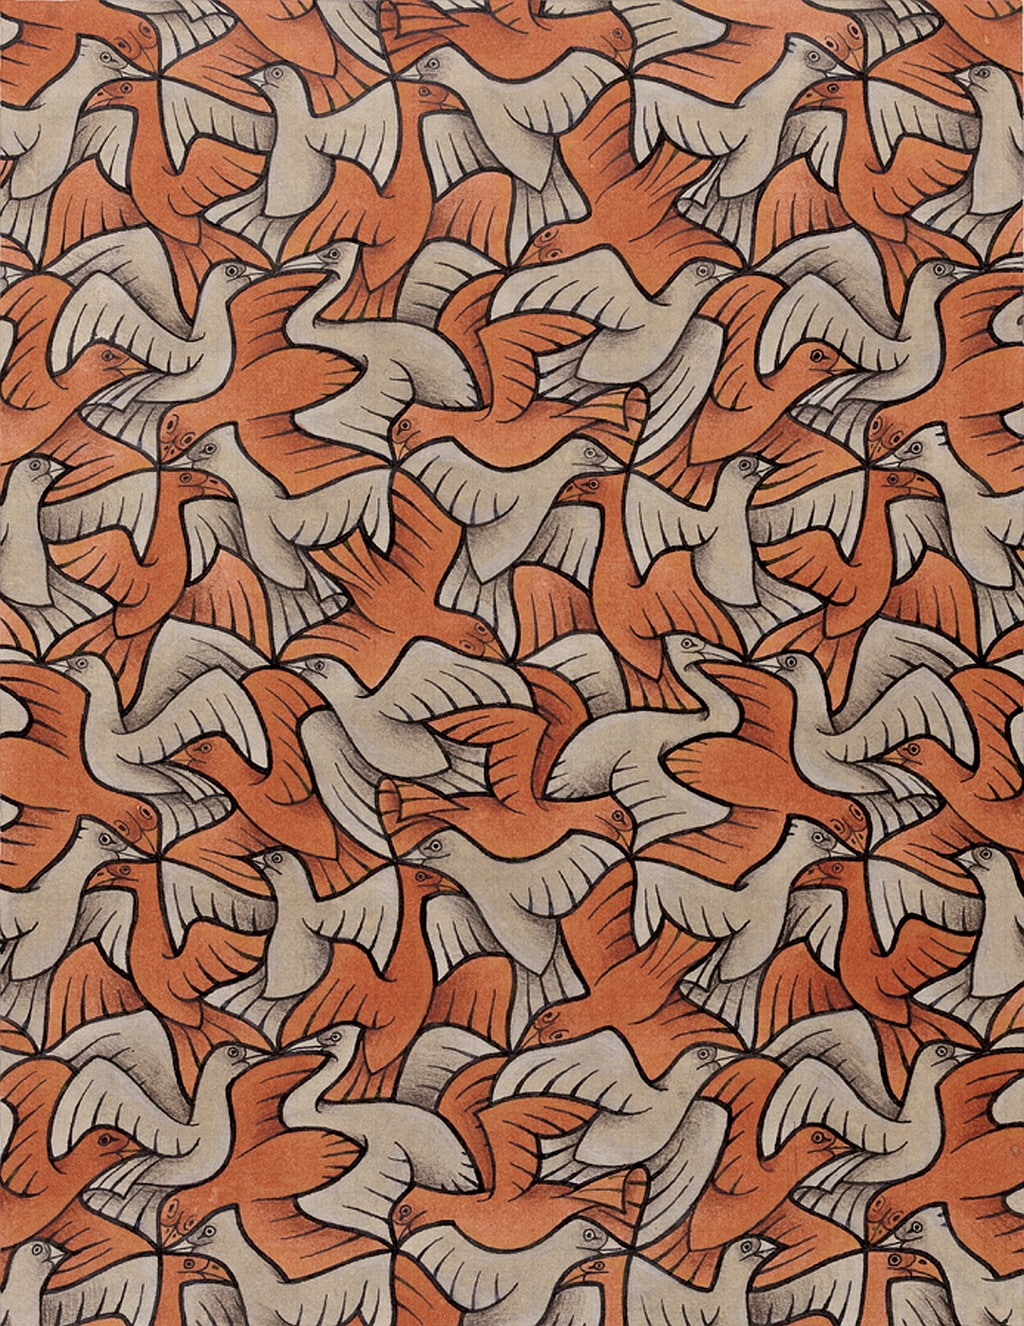 drawing artwork m c_ escher optical illusion symmetry sketches animals birds red flying wings